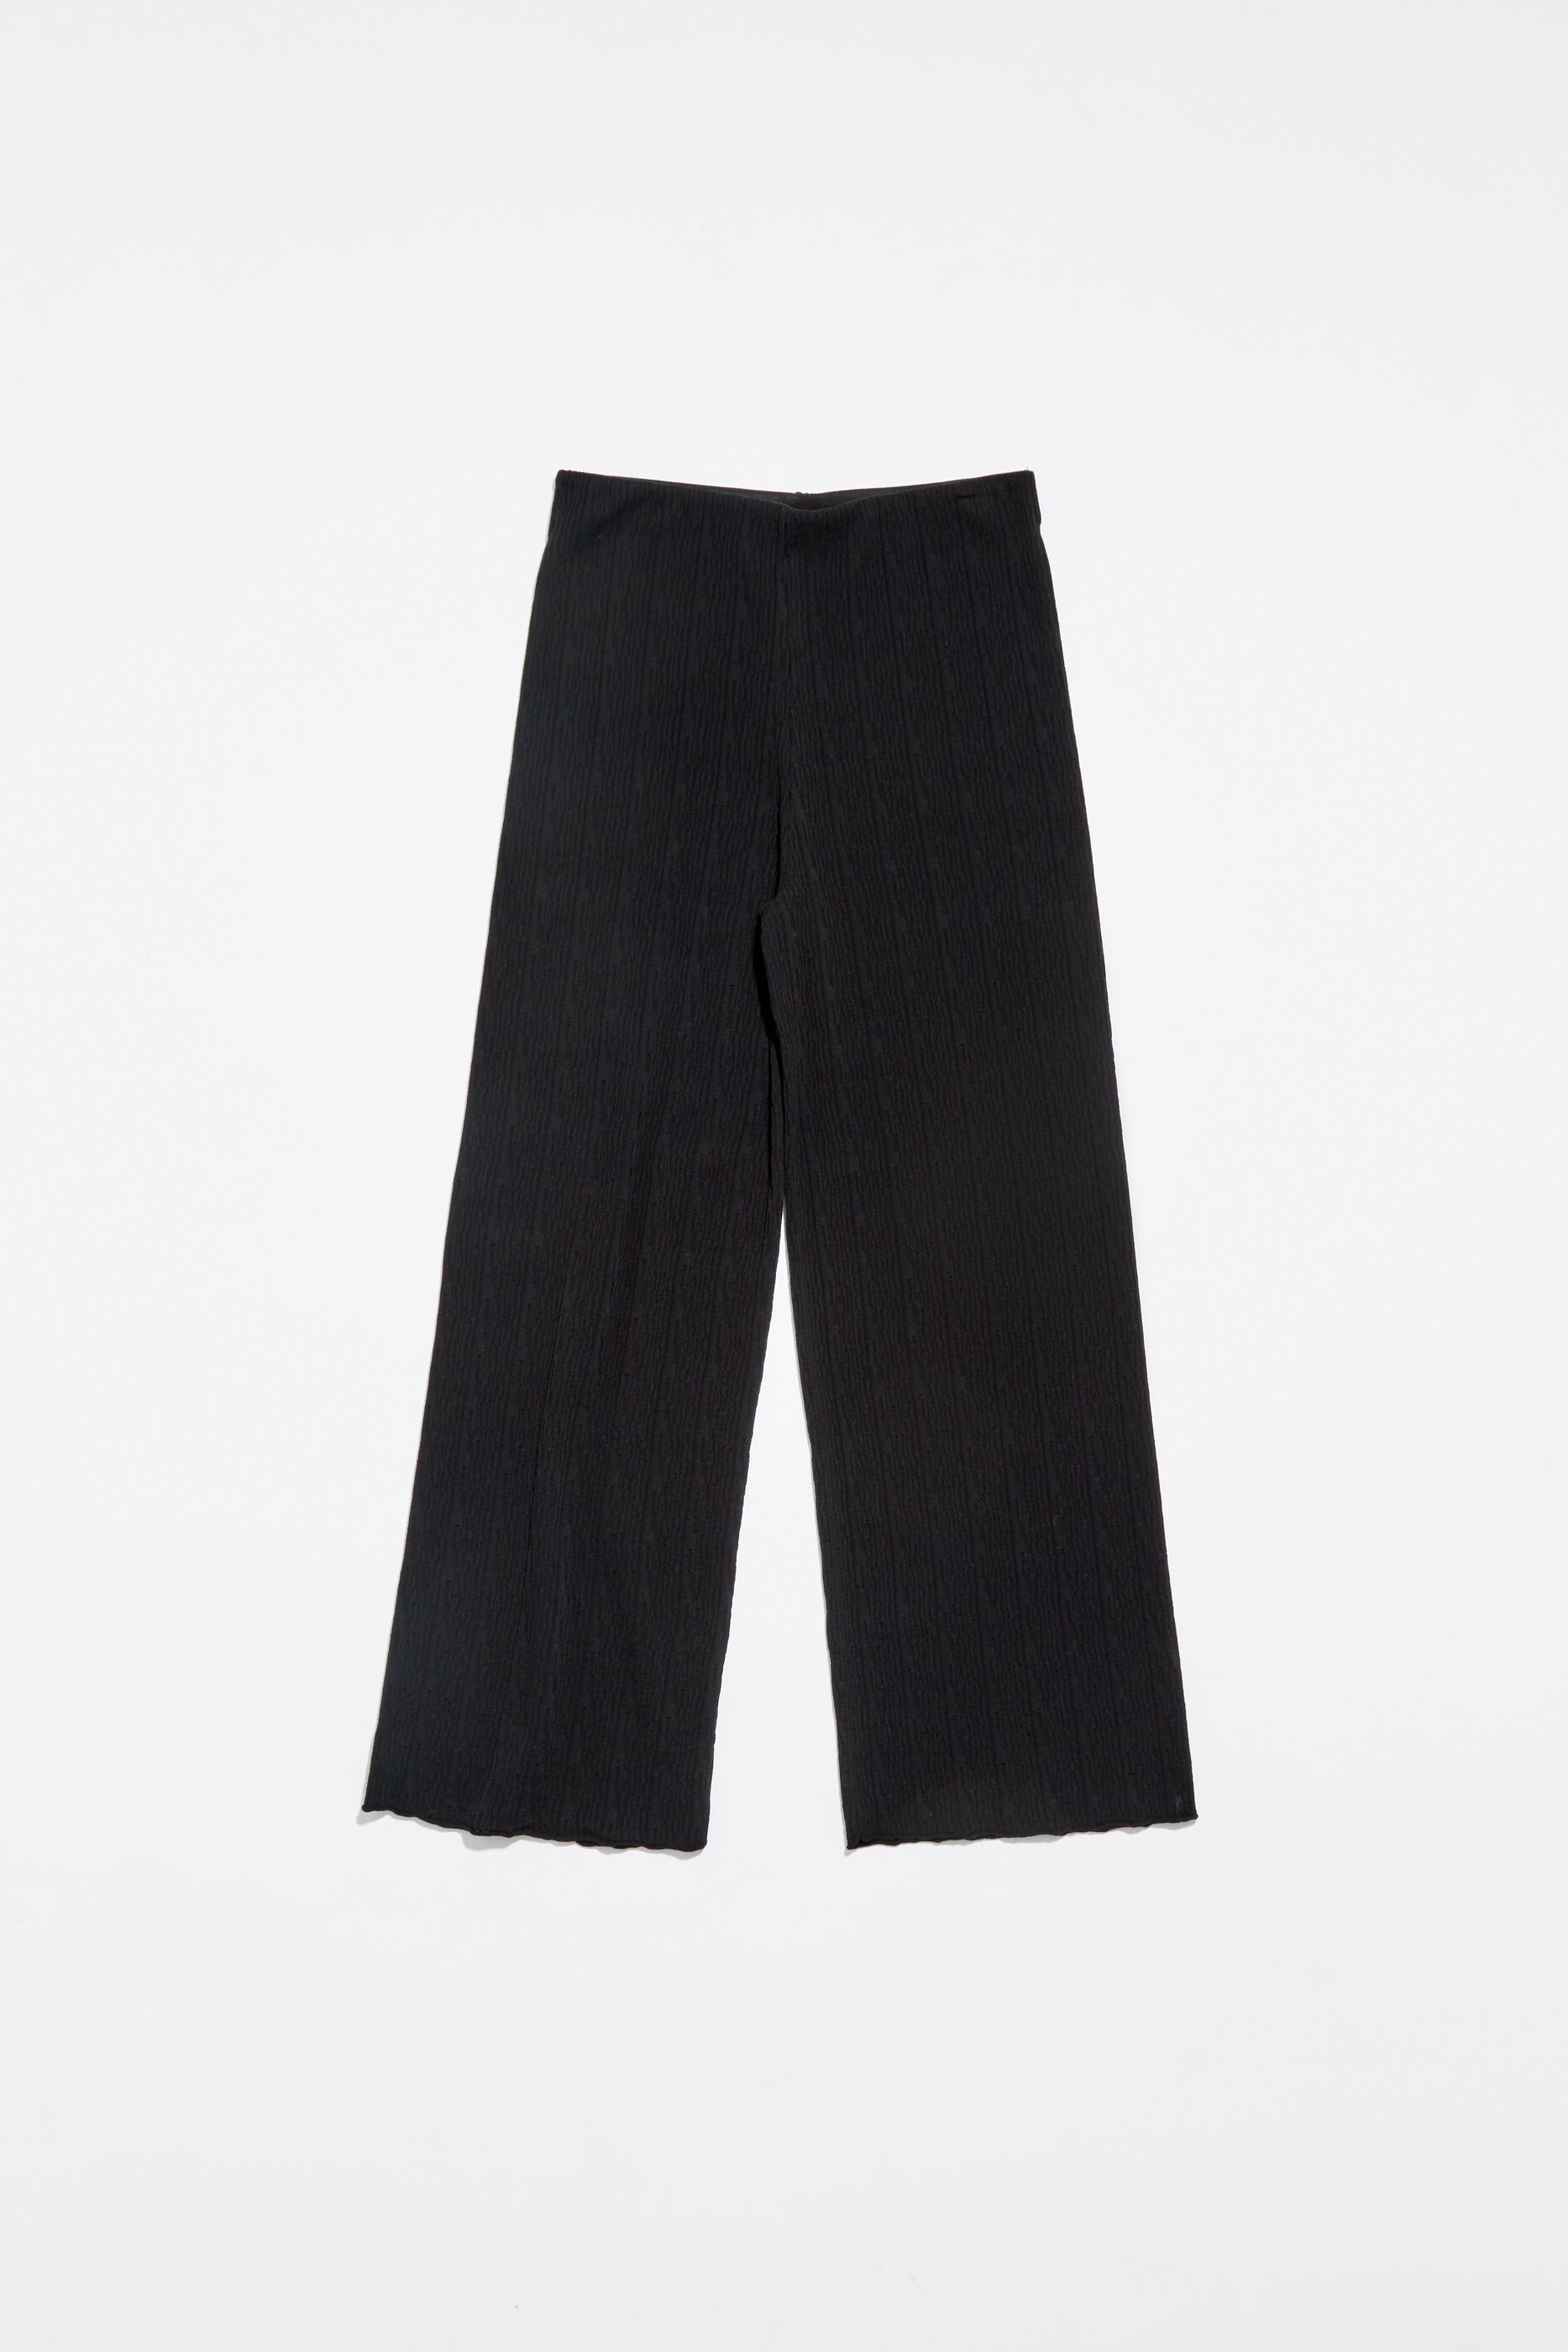 Uta Raasch  Pullon trousers in superstretchy jersey  blackgold